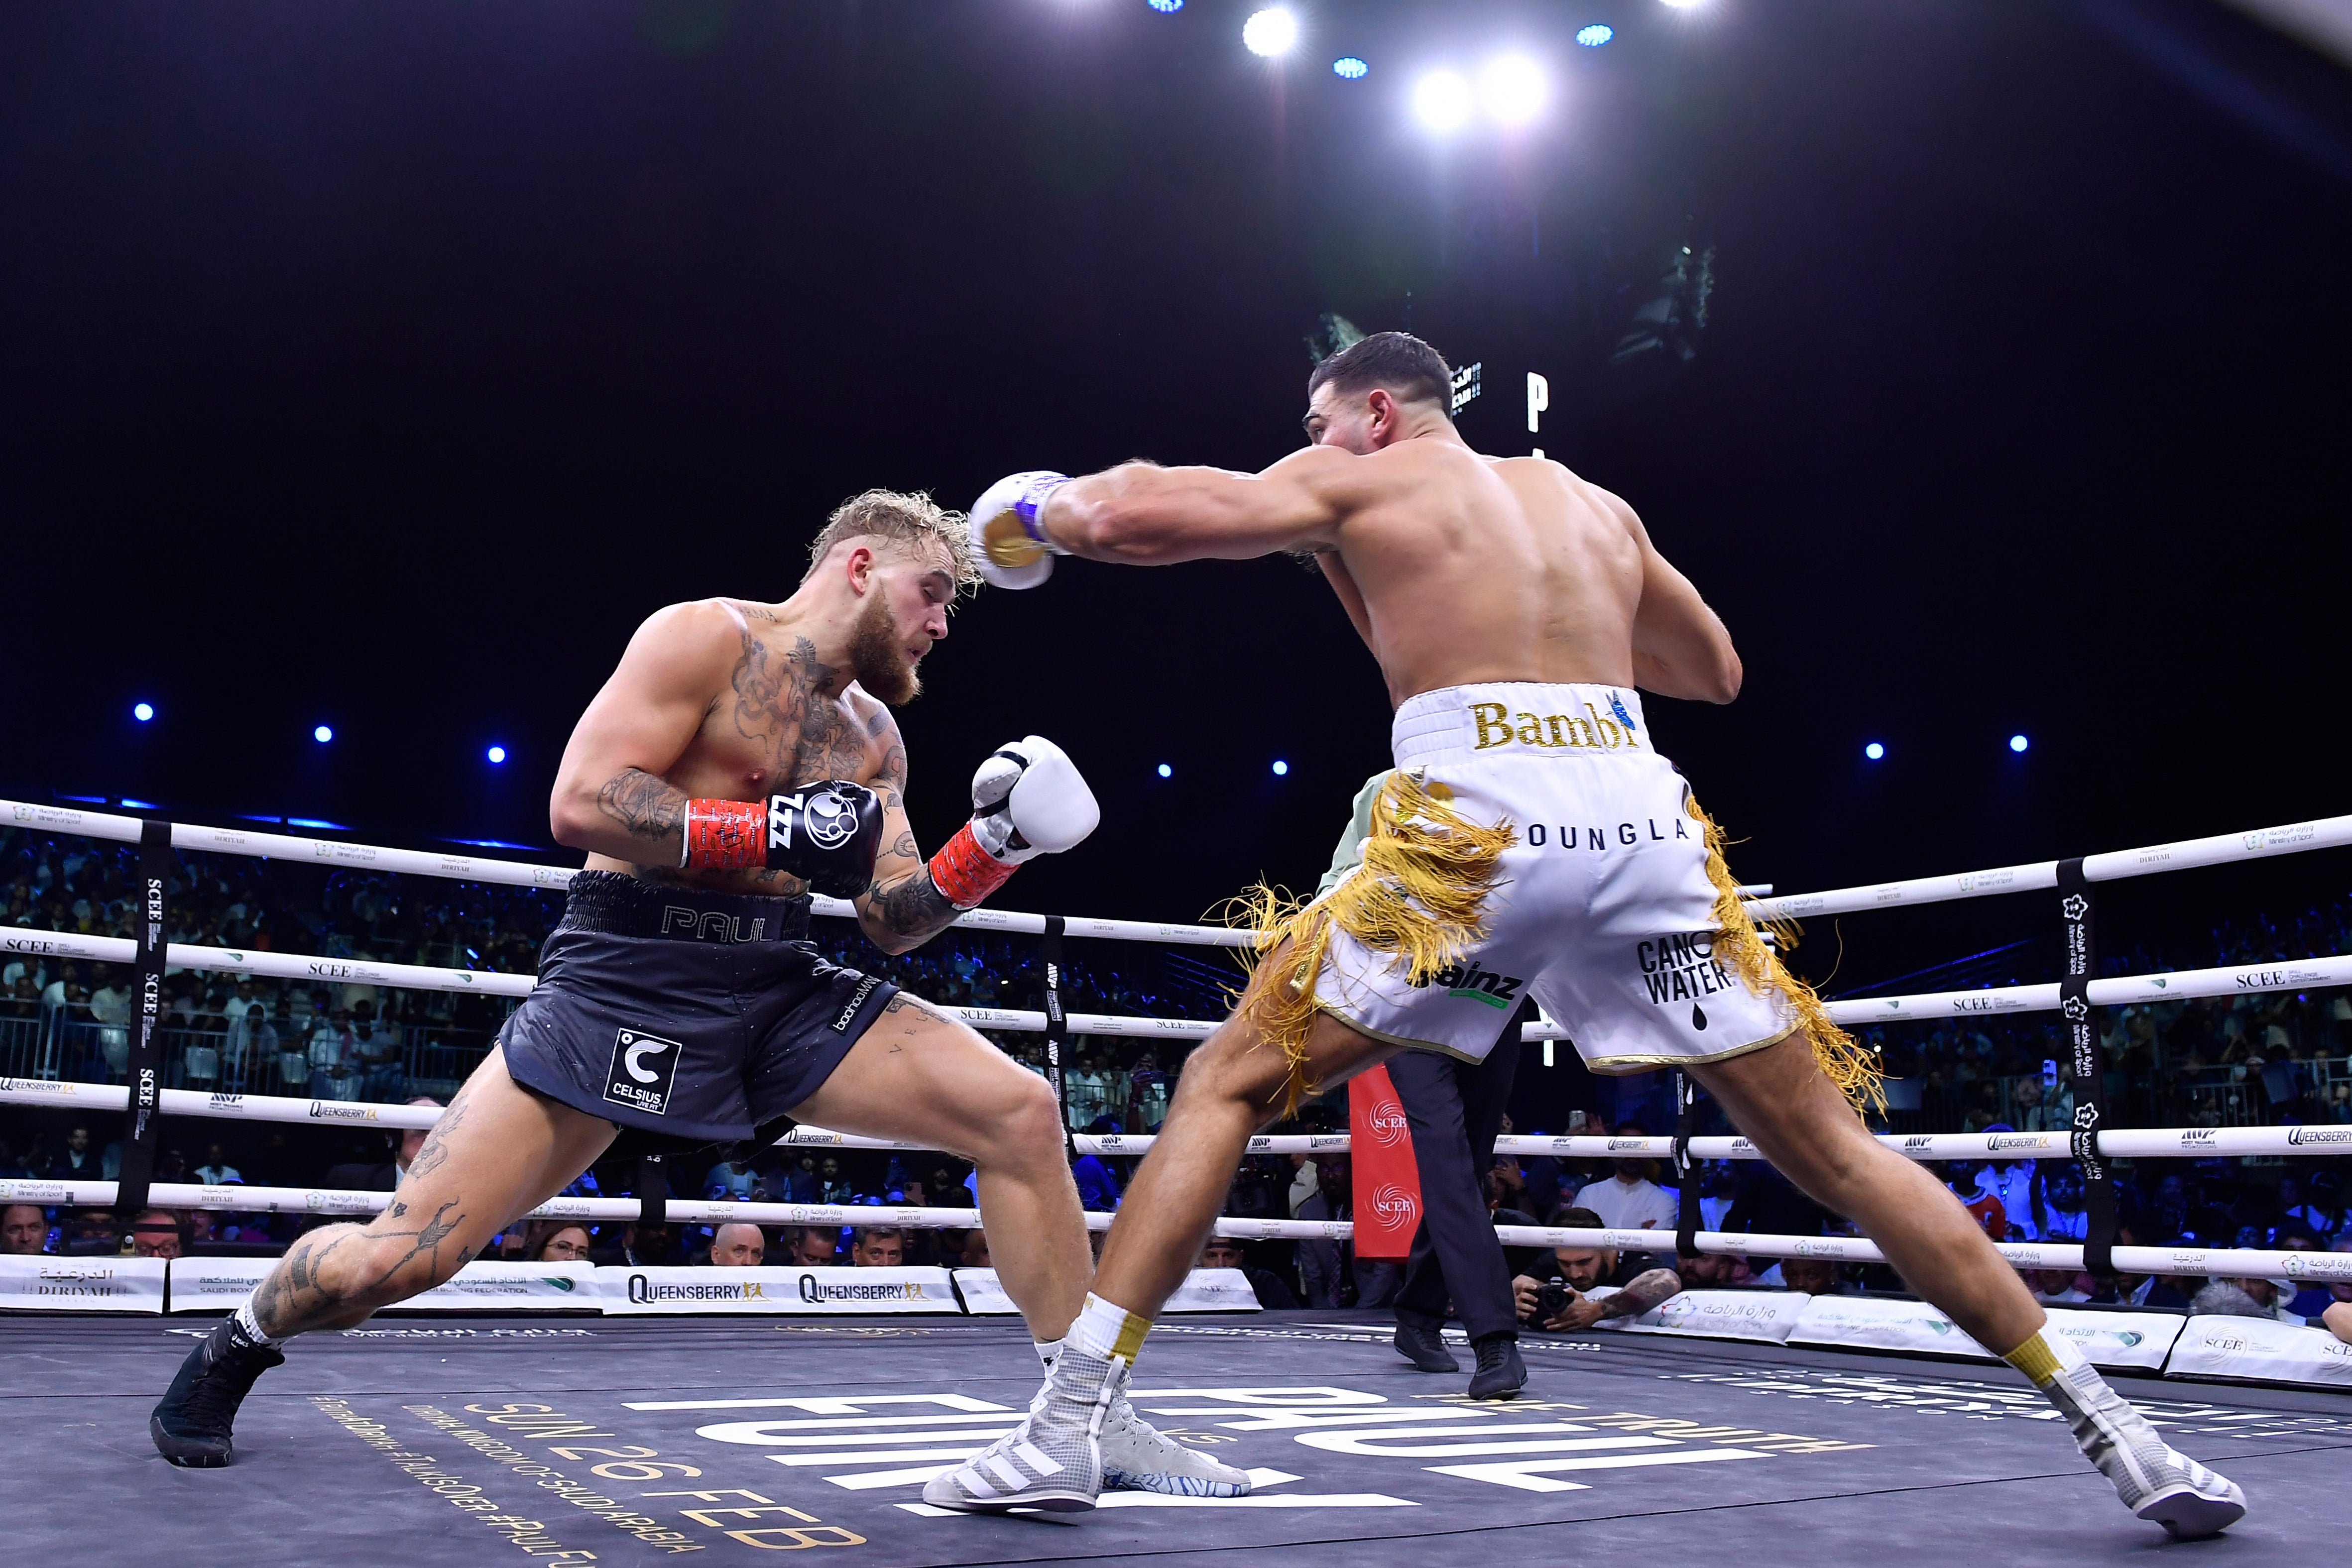 Paul during his defeat by Tommy Fury in Saudi Arabia – the first loss of his career